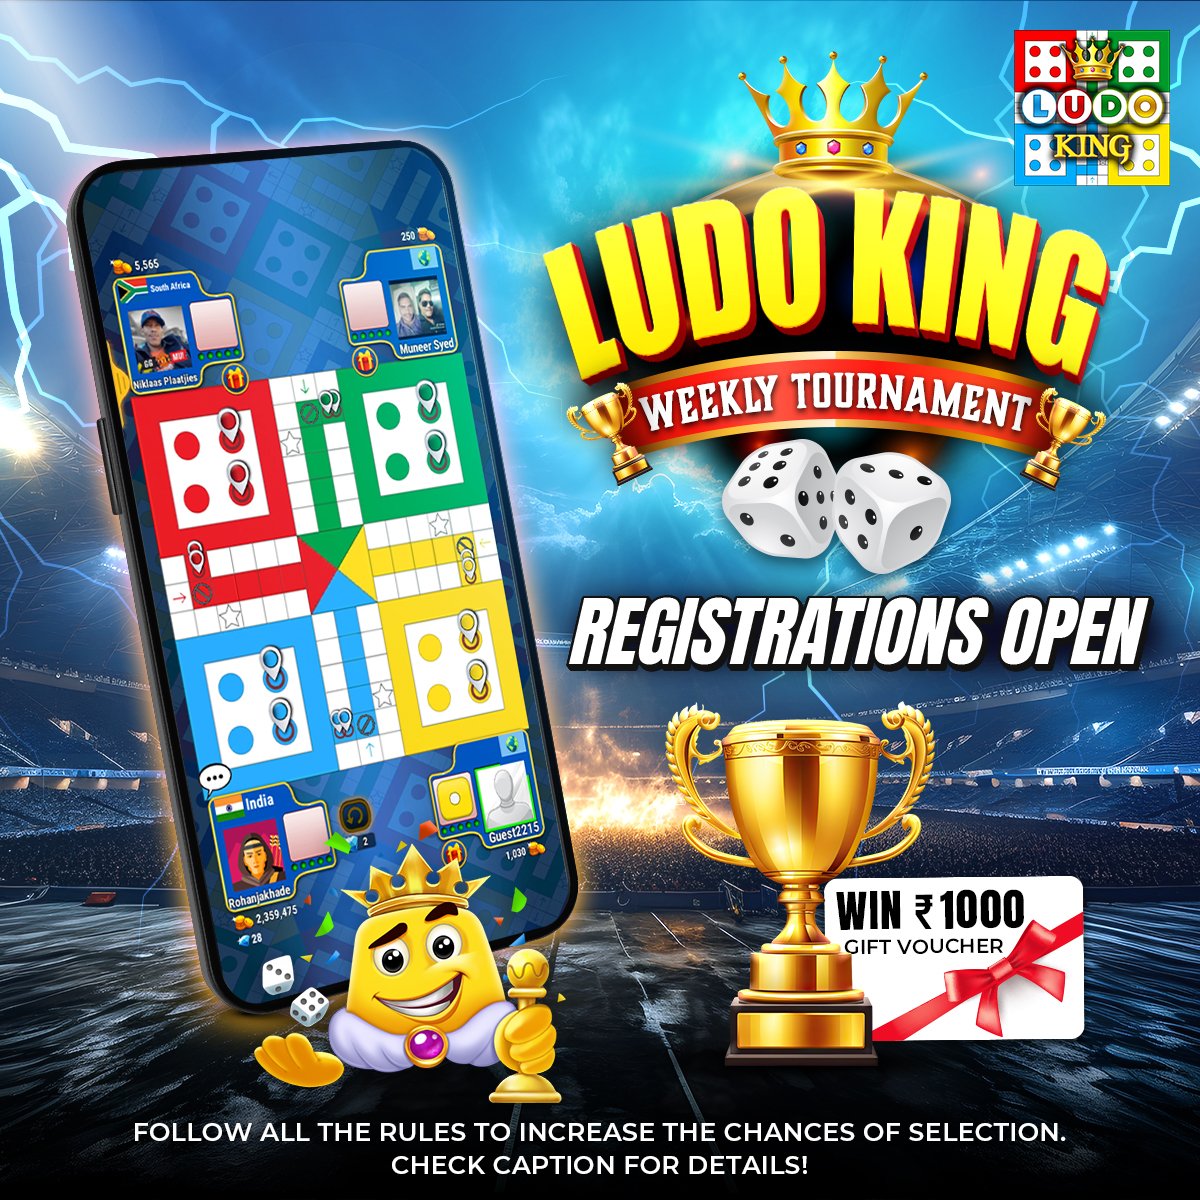 #LudoKing Tournament 🏆 Registrations are open for this week & the winner of the game wins Rs. 1000 🔊 Rules: 🎲 Like & share top 3 posts of @LudoKingGame 🎲 Follow Ludo King & Comment ' I want to play the #LudoKingTournament ' 🎲 Tag your Friends #contestalert #contest